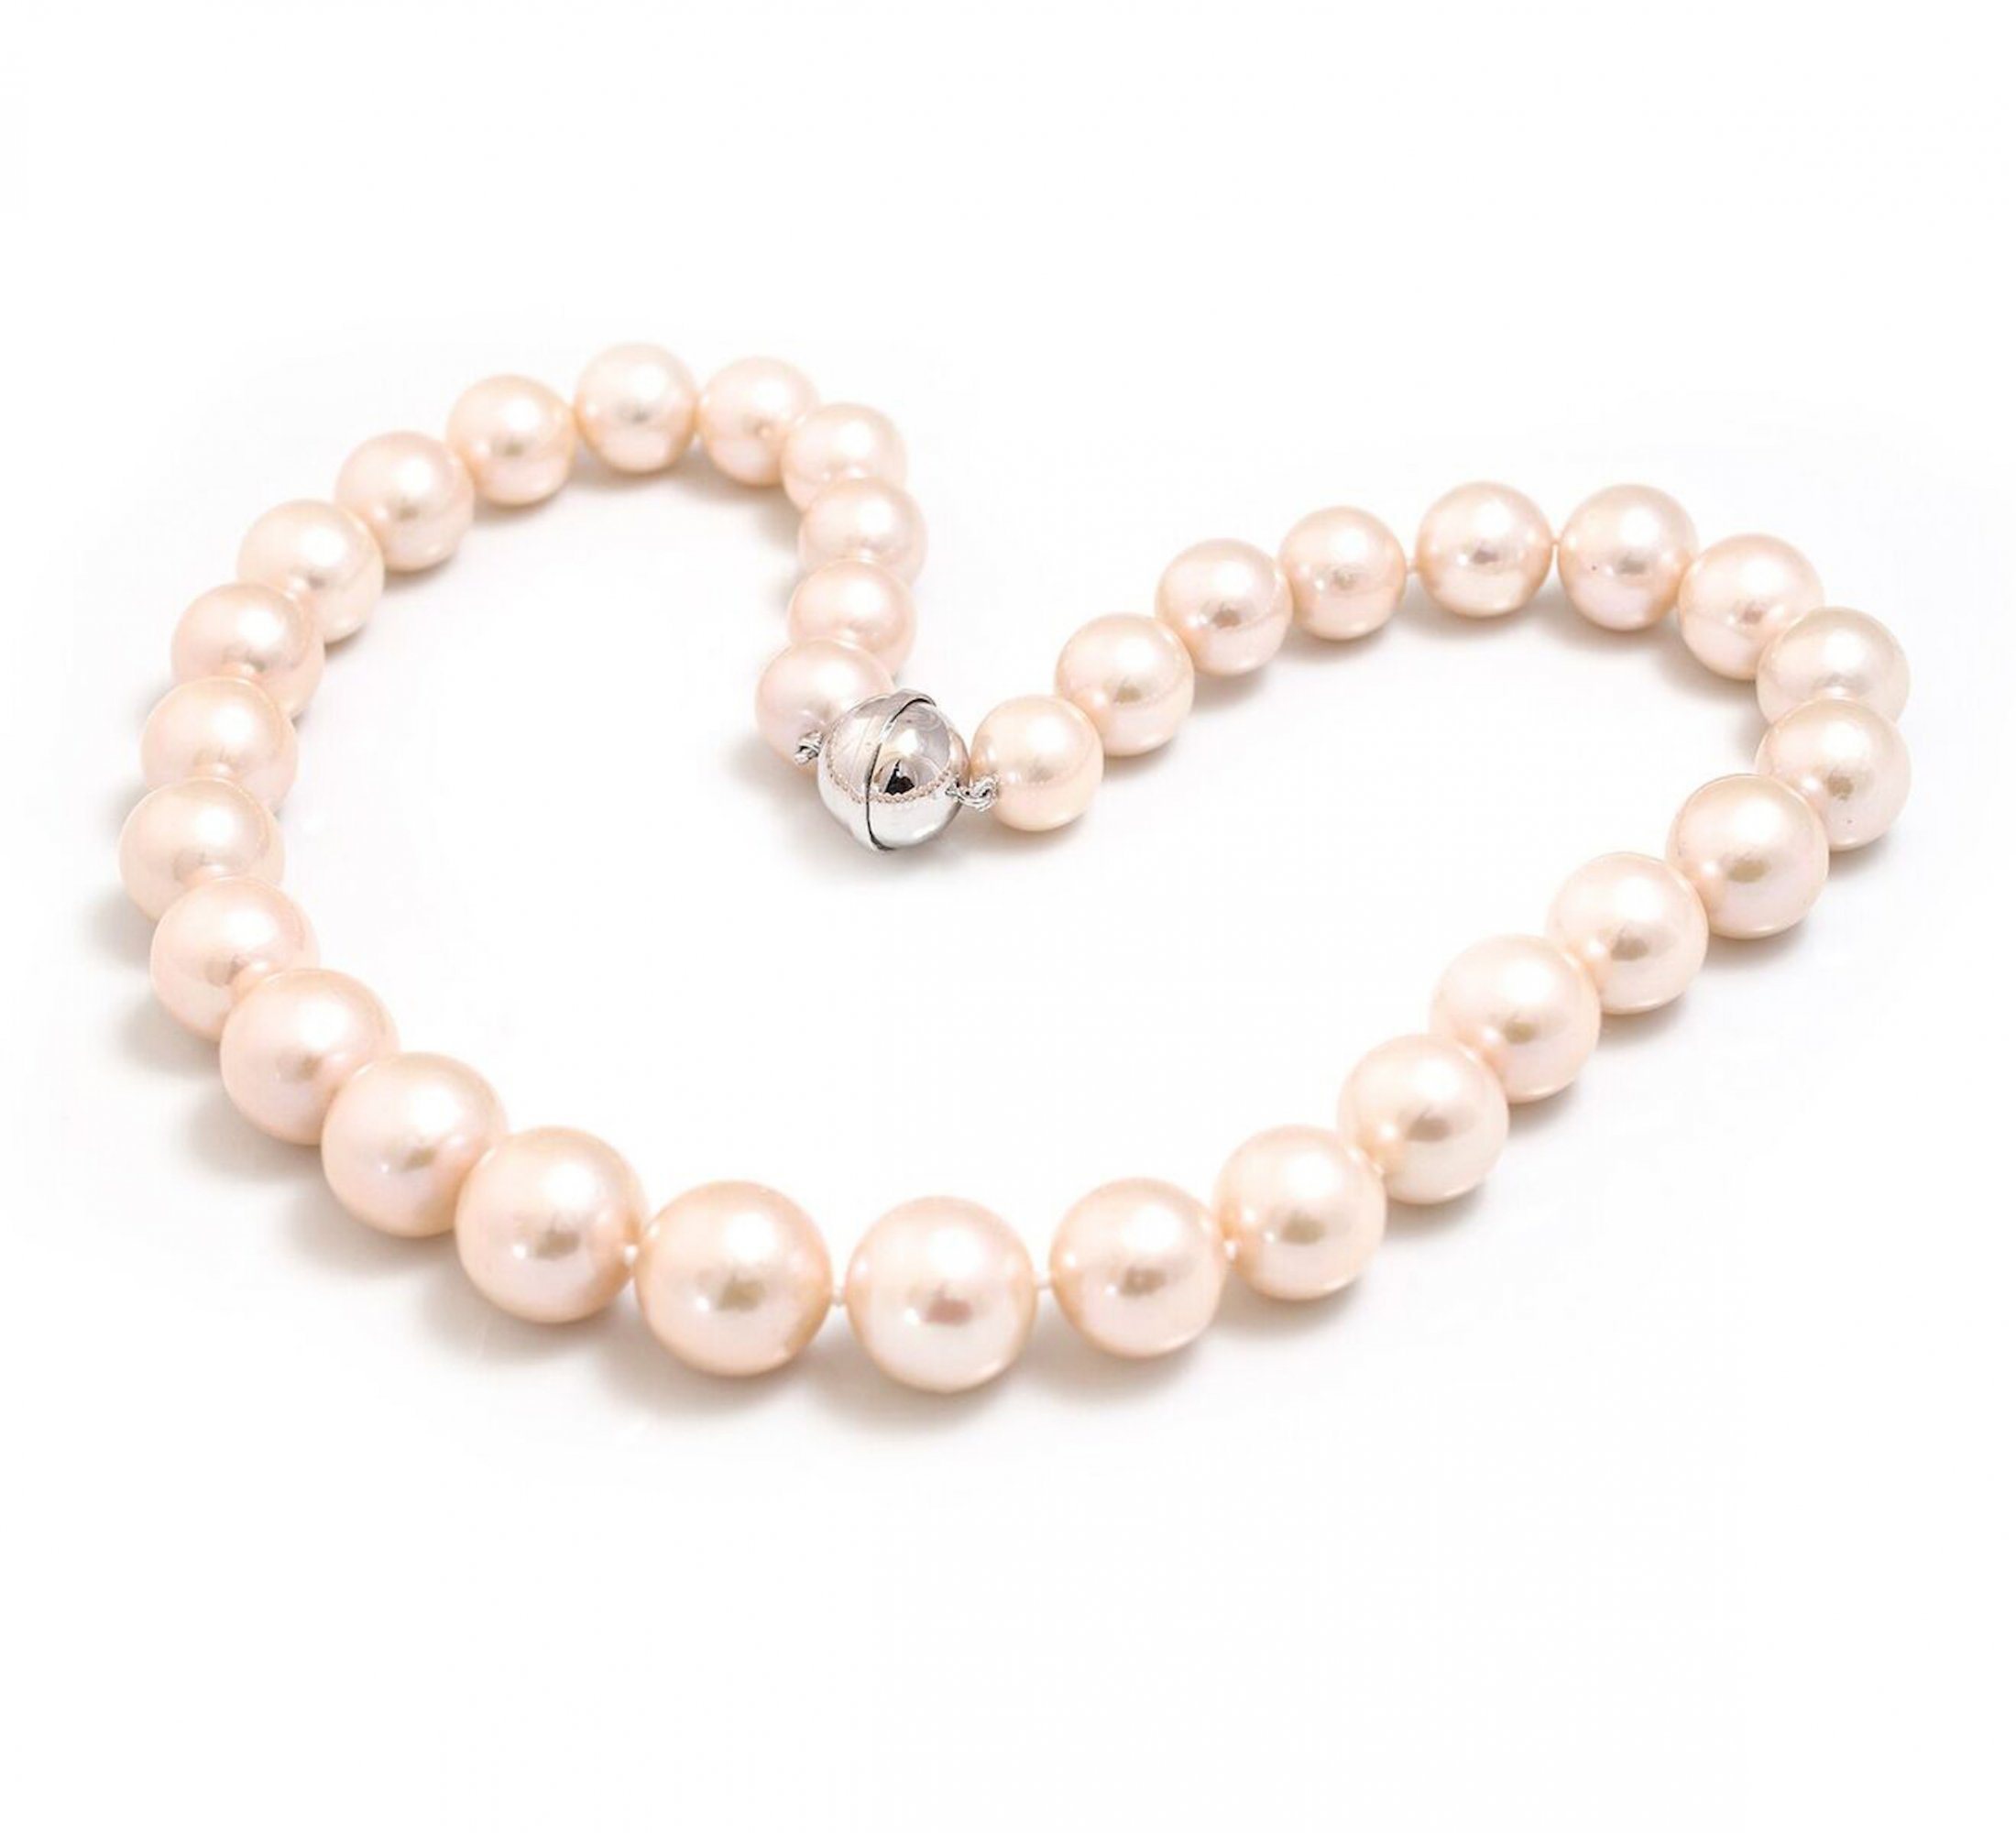 AAA Graded Lustre River Pearls Necklace